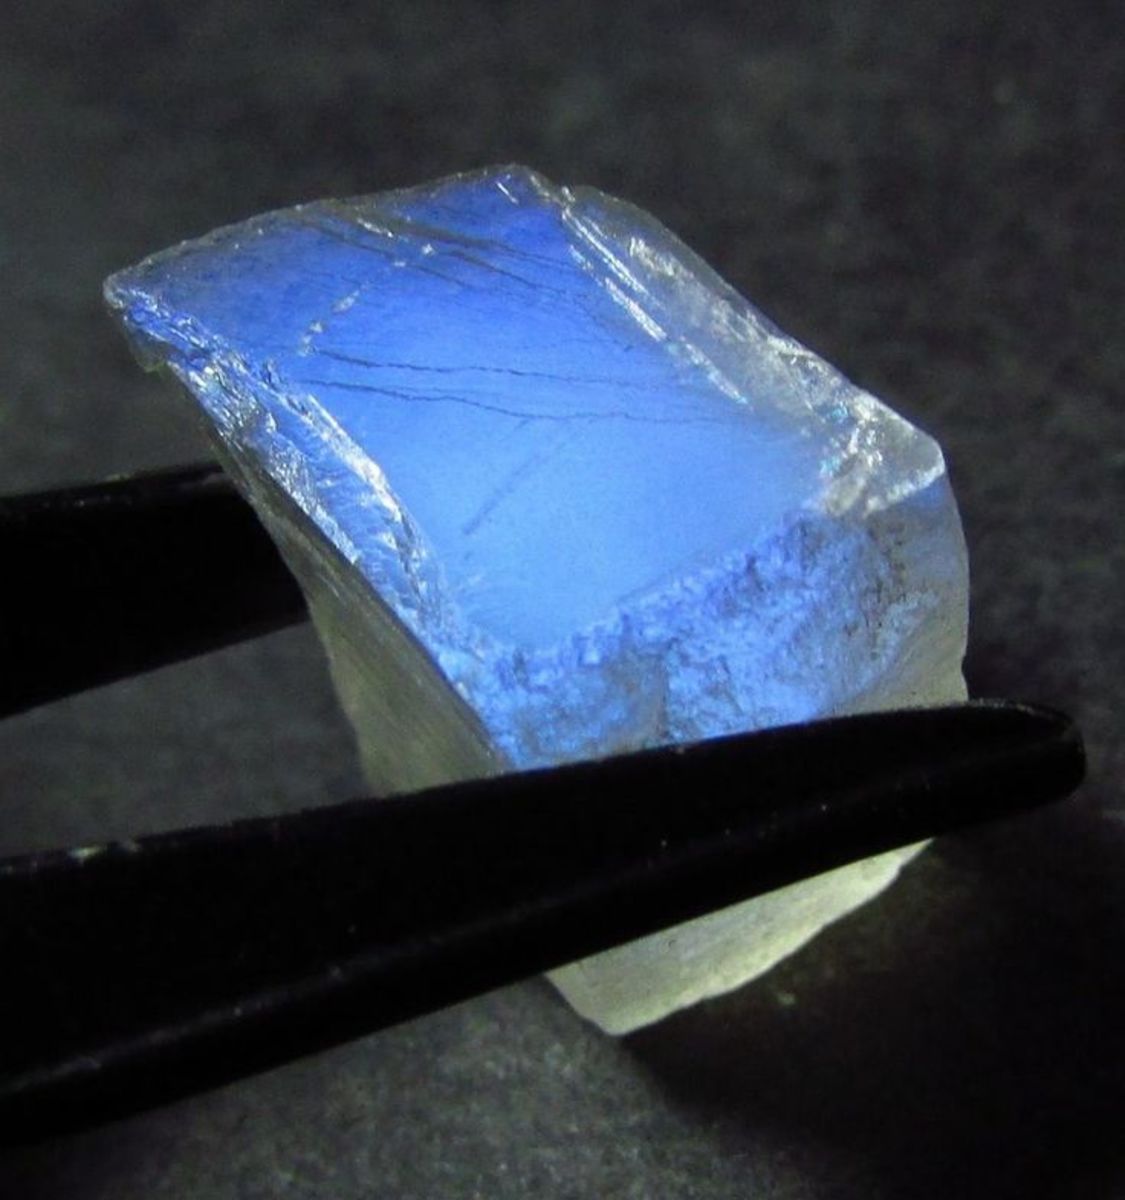 A stunning example of a blue Schiller in an uncut moonstone specimen. Courtesy of jewelsroughgems ebay.com